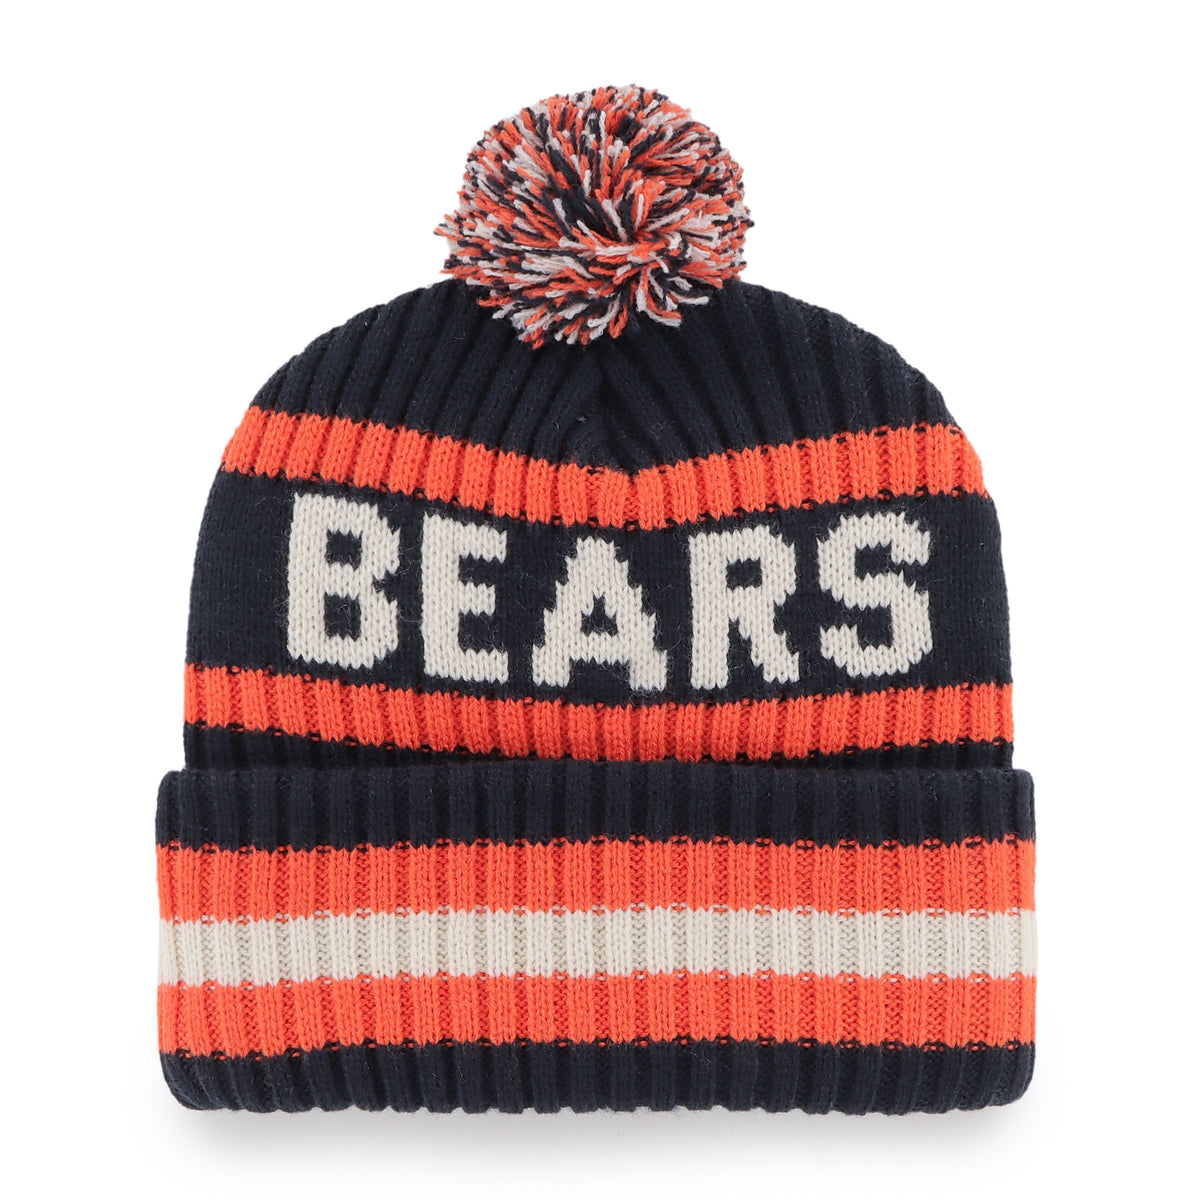 CHICAGO BEARS BERING '47 CUFF KNIT